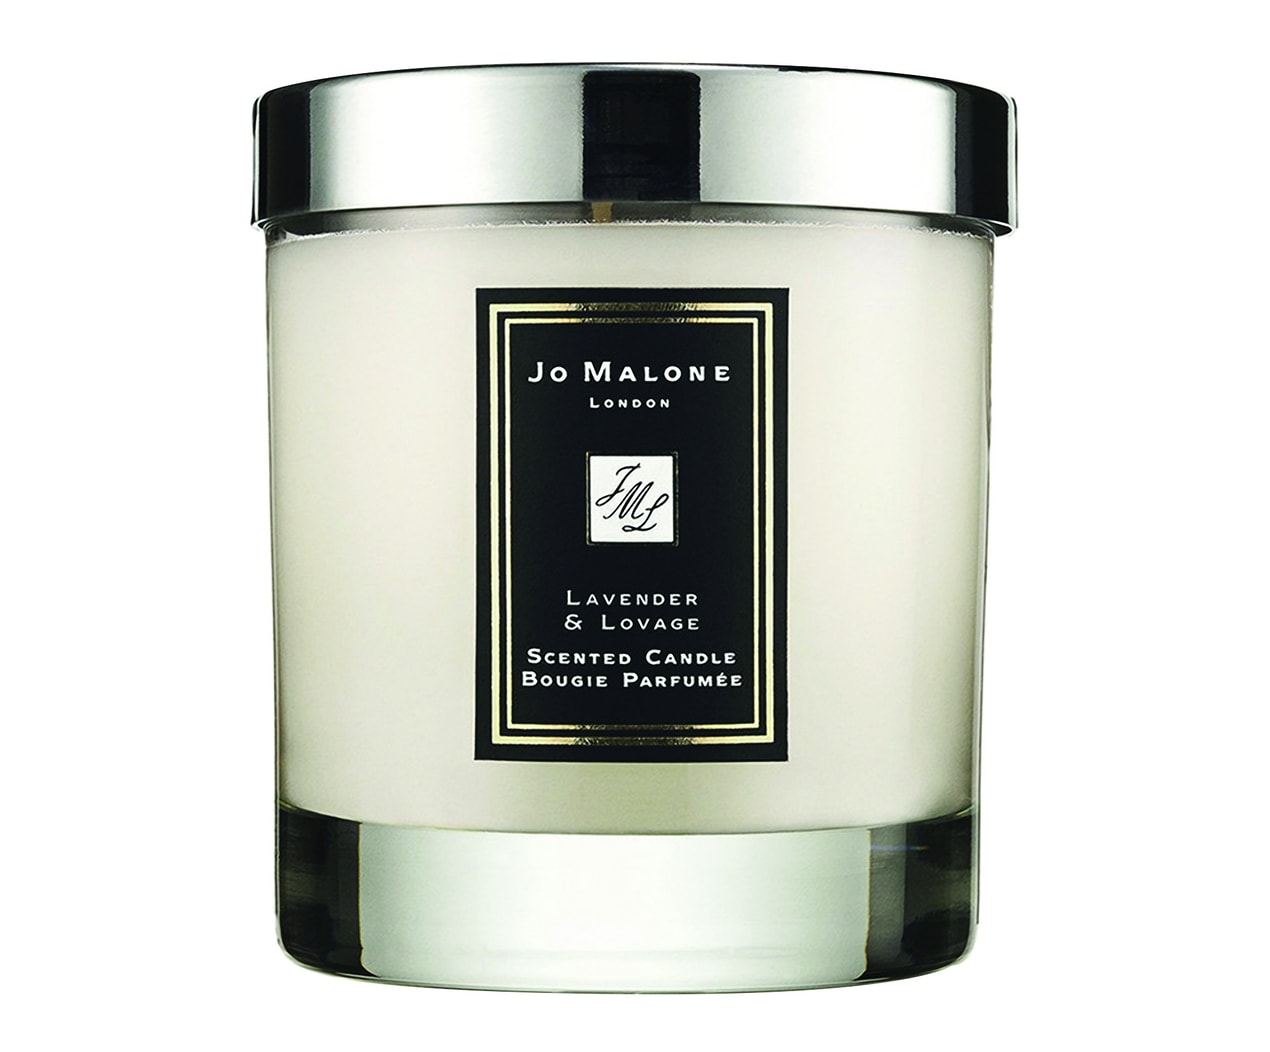 Jo Malone Lavender & Lovage scented candle